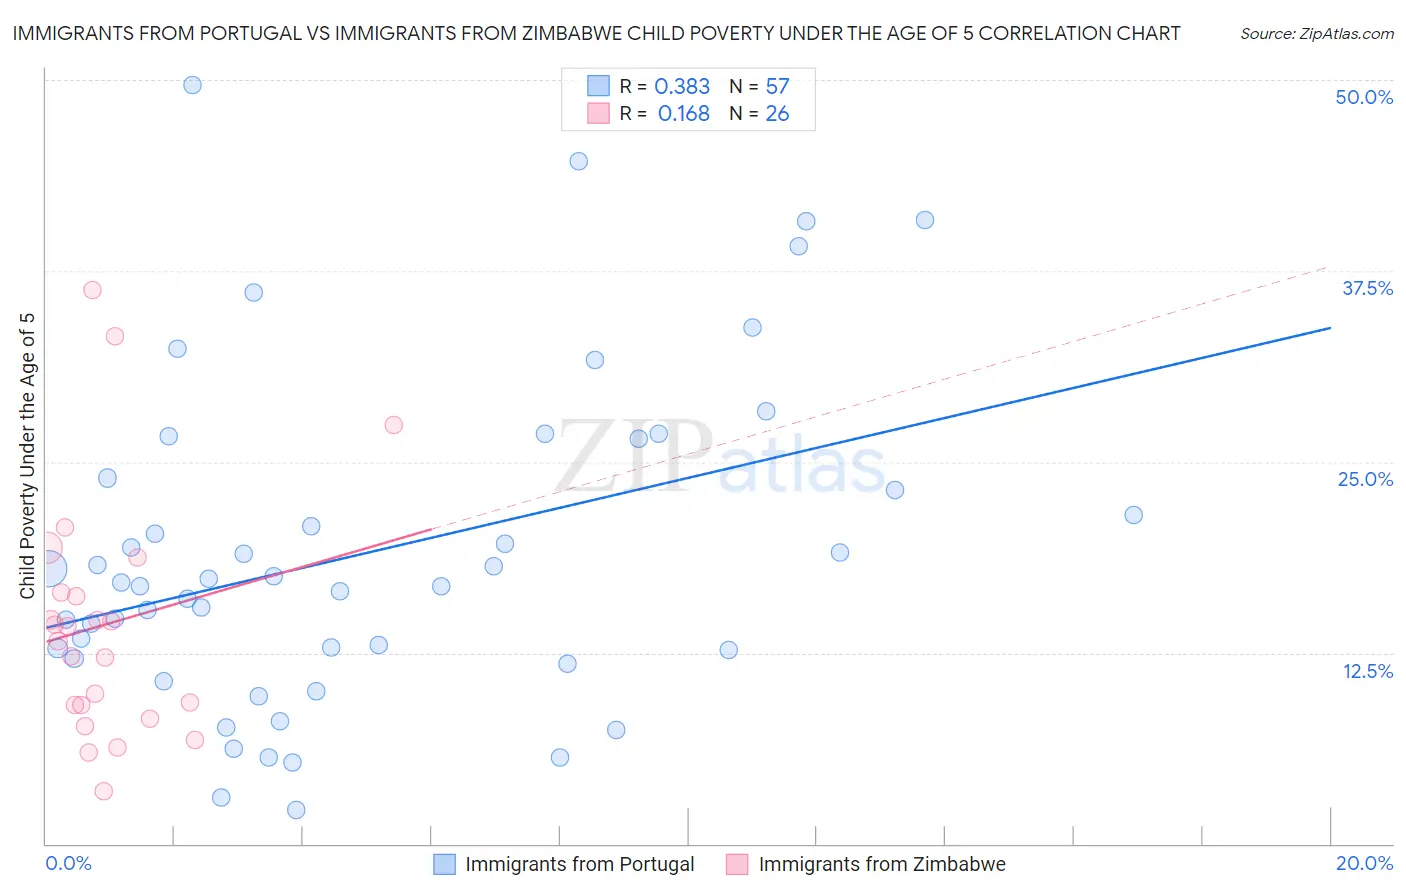 Immigrants from Portugal vs Immigrants from Zimbabwe Child Poverty Under the Age of 5